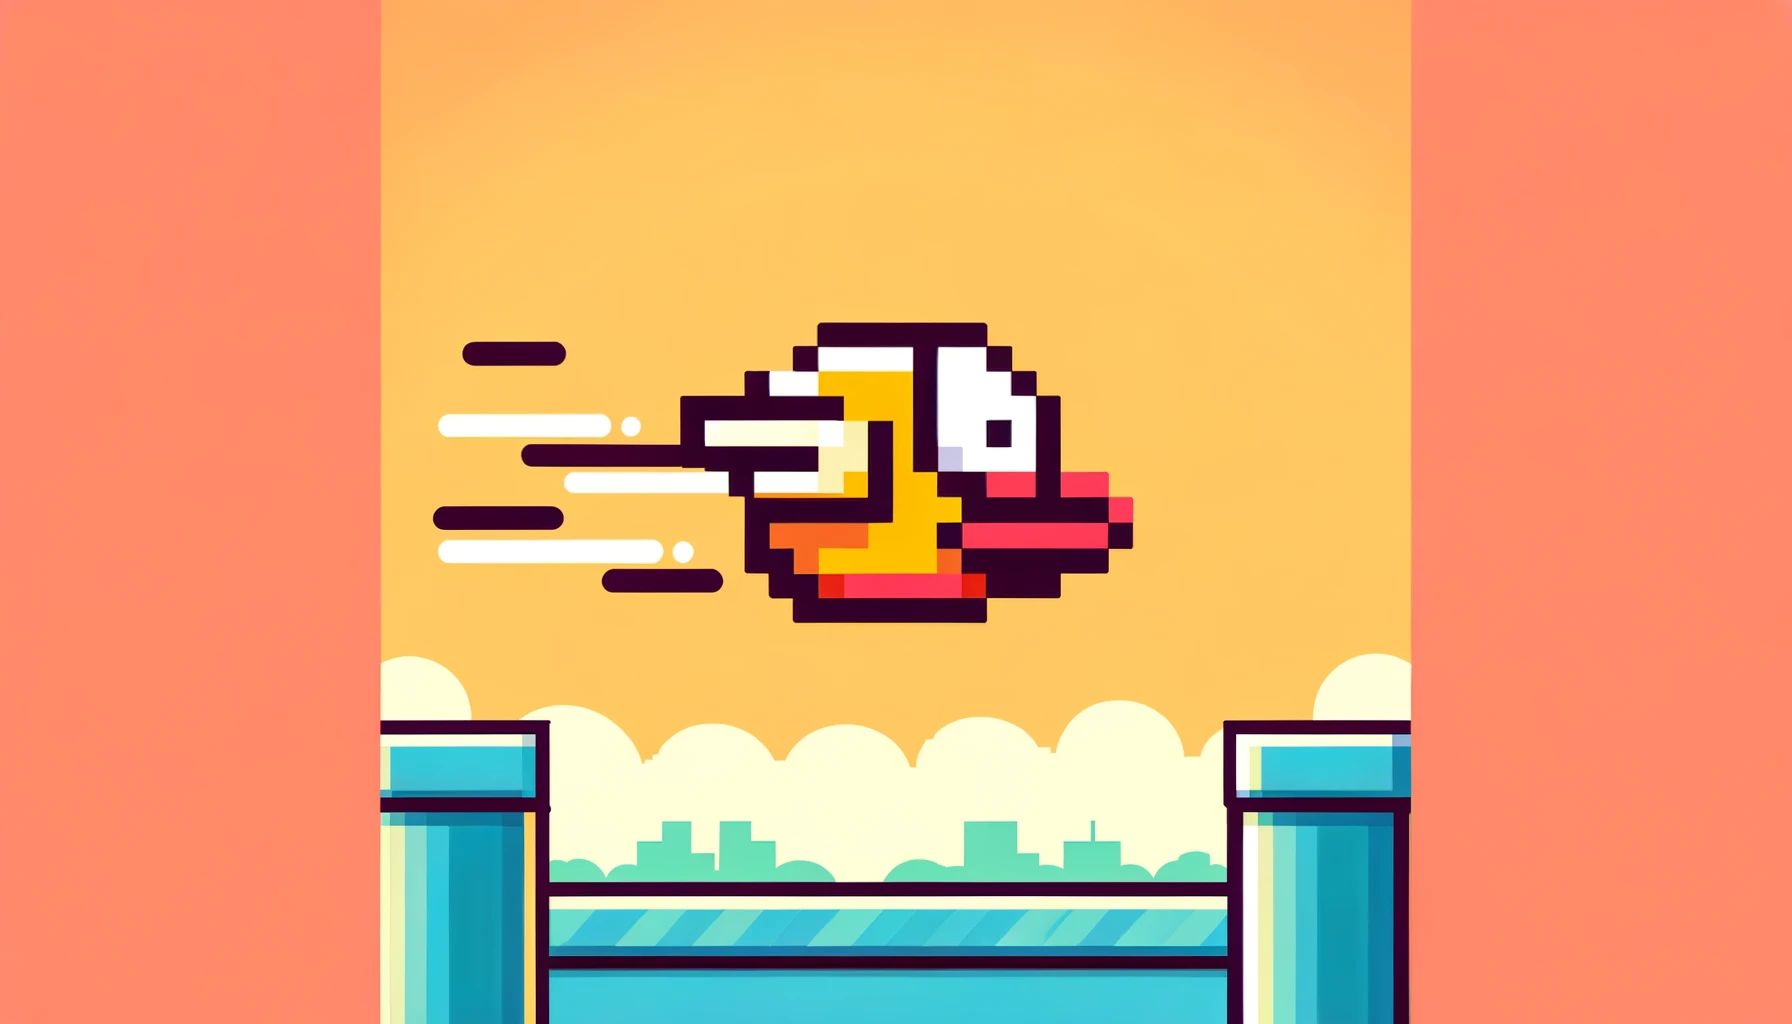 Create your own flappy bird game using Unity